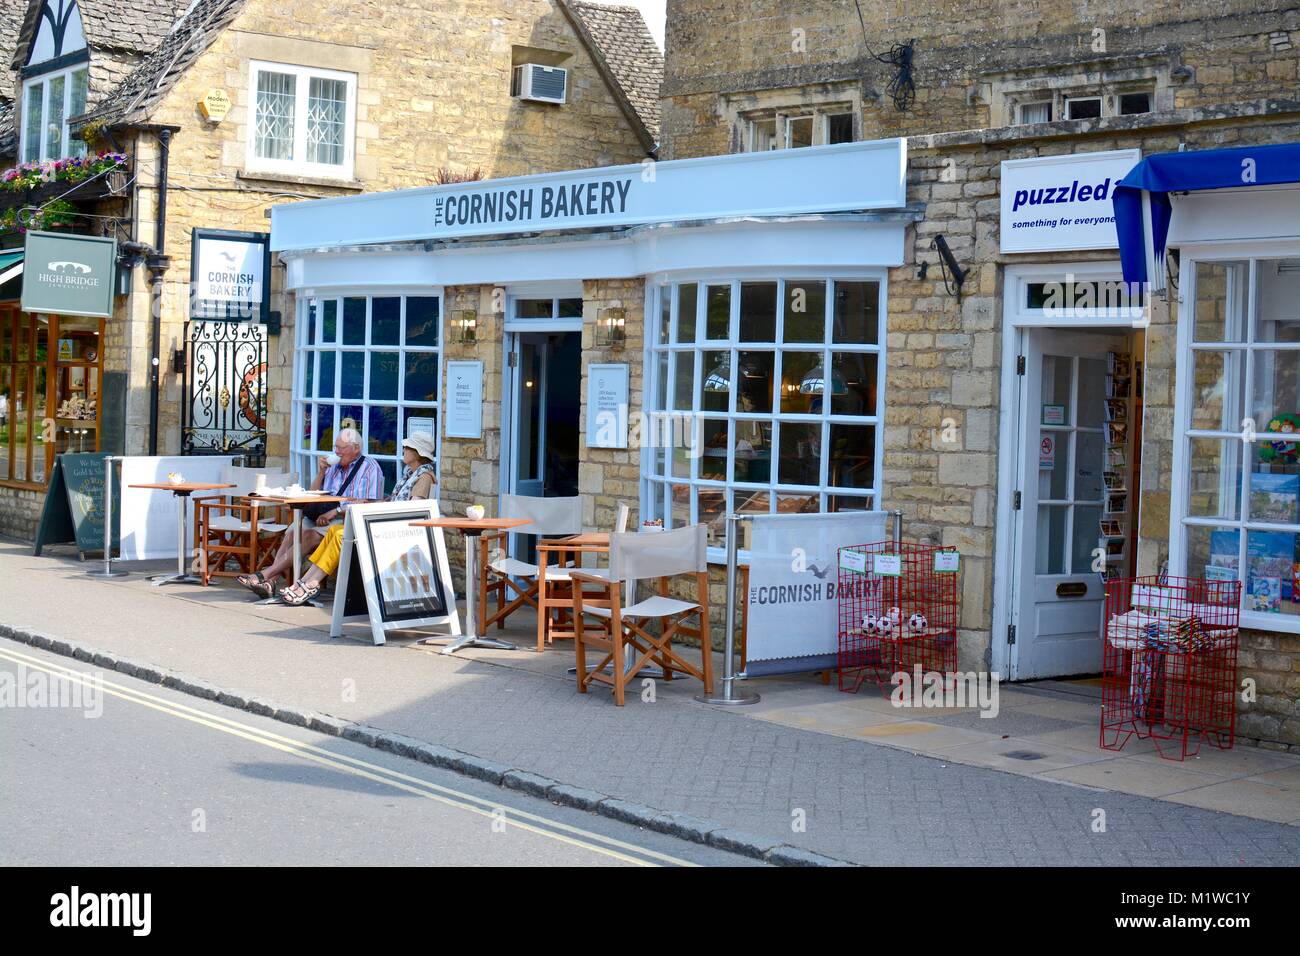 People enjoying food and drink at the Cornish bakery, main street, Bourton on the water, Cotswolds, Gloucestershire, UK Stock Photo